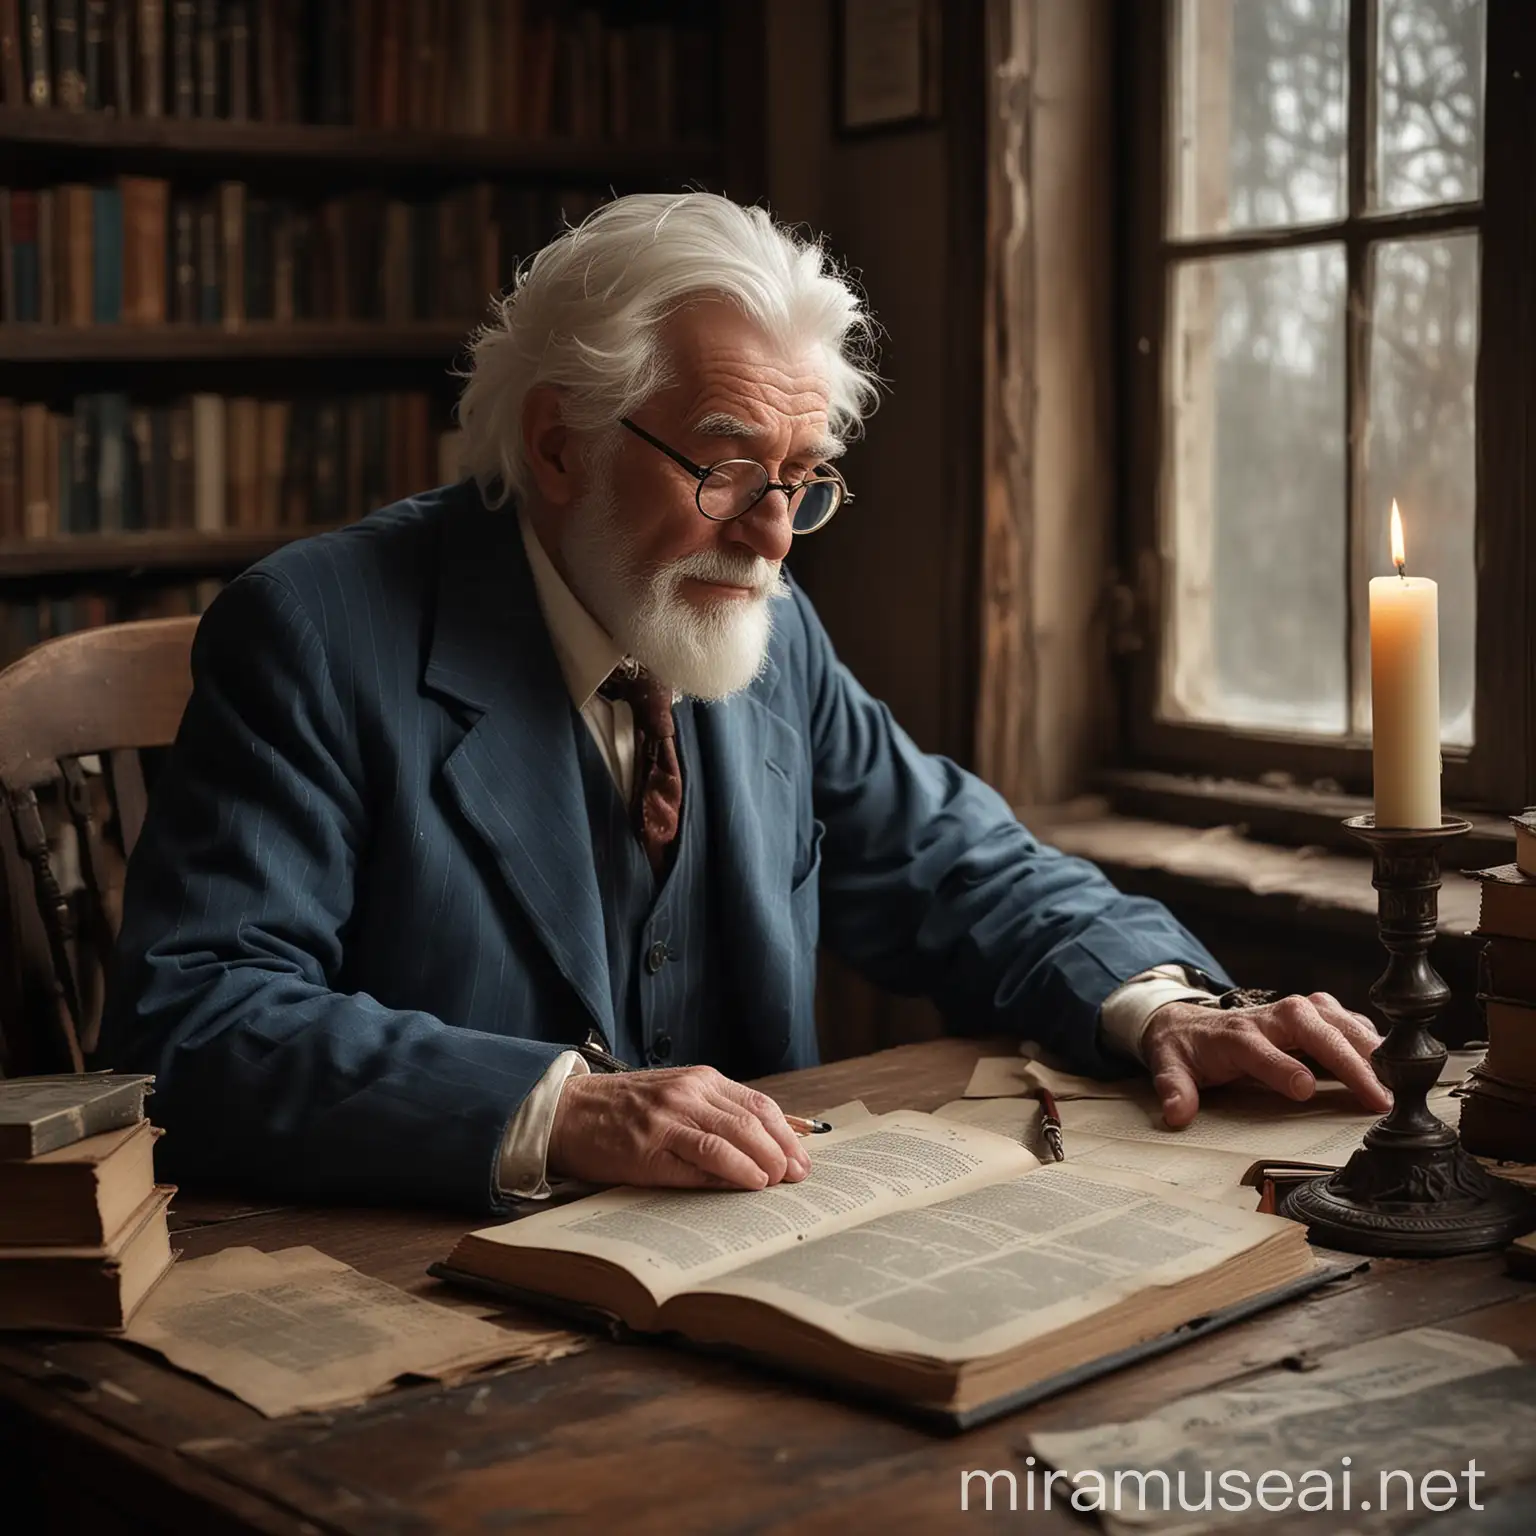 Elderly Scholar in Tranquil Study Pensive Wisdom Amidst Books and Candlelight